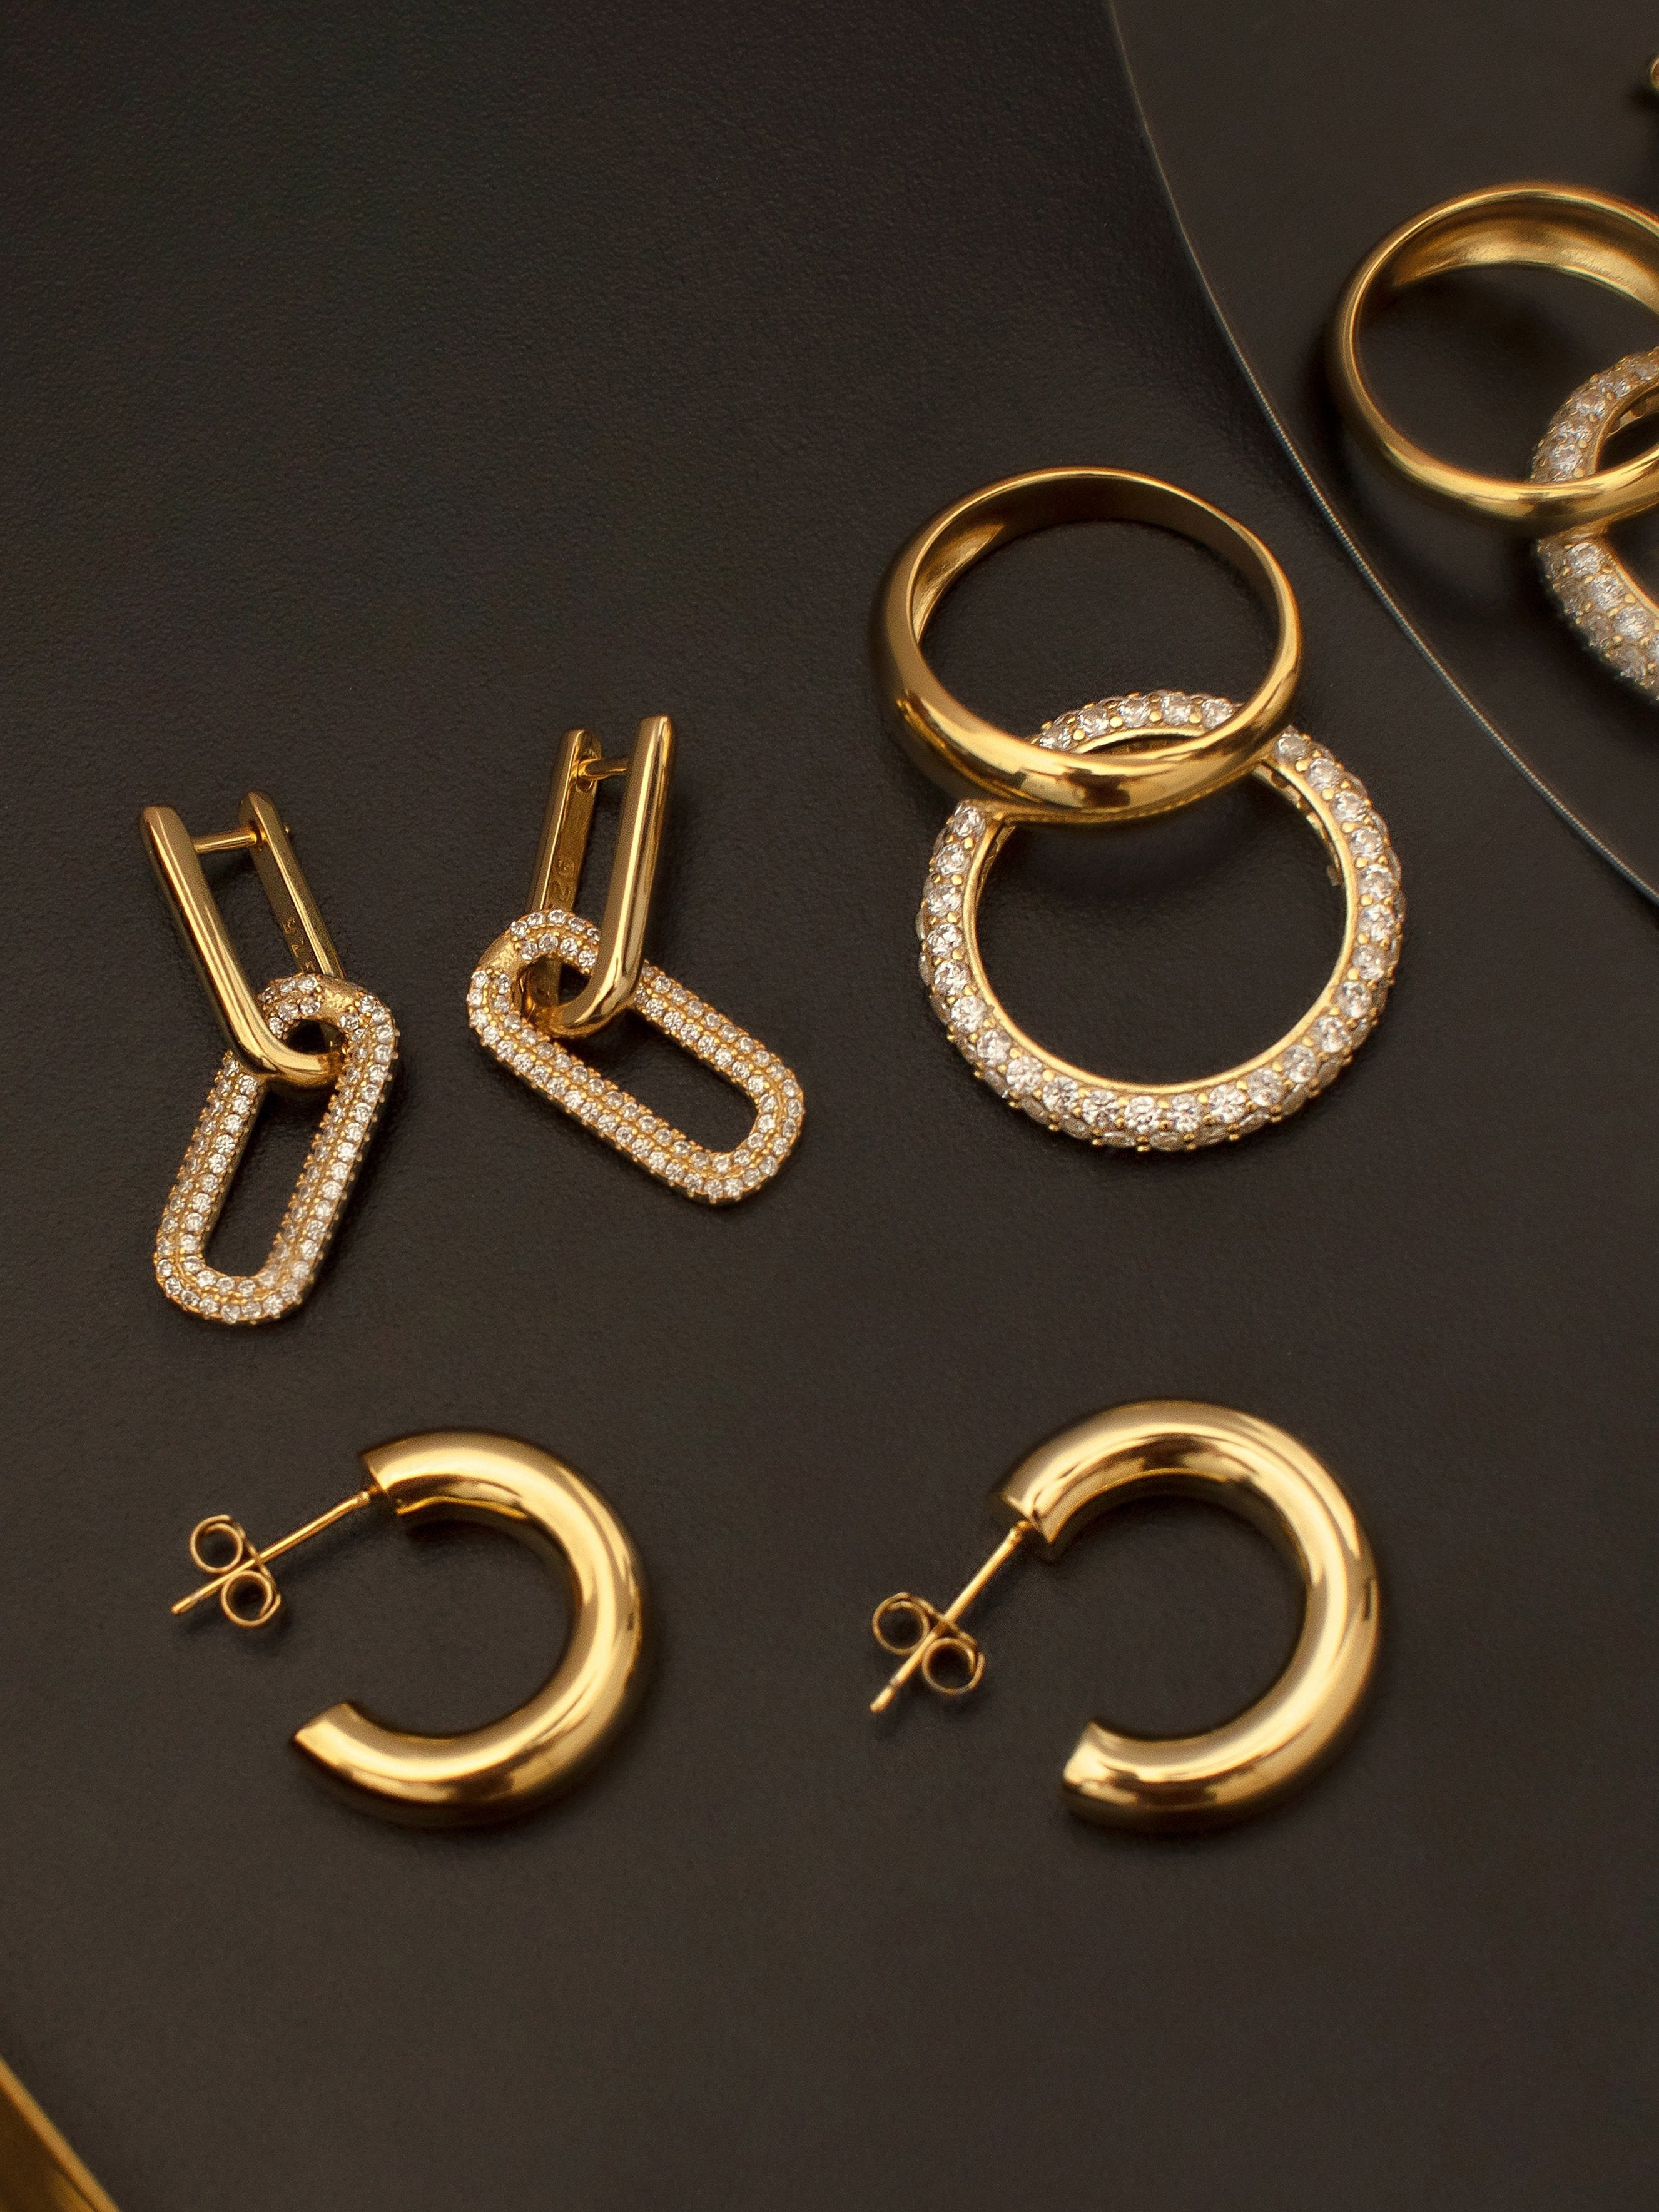 Gold Chain Hoop Earrings with removable charms.